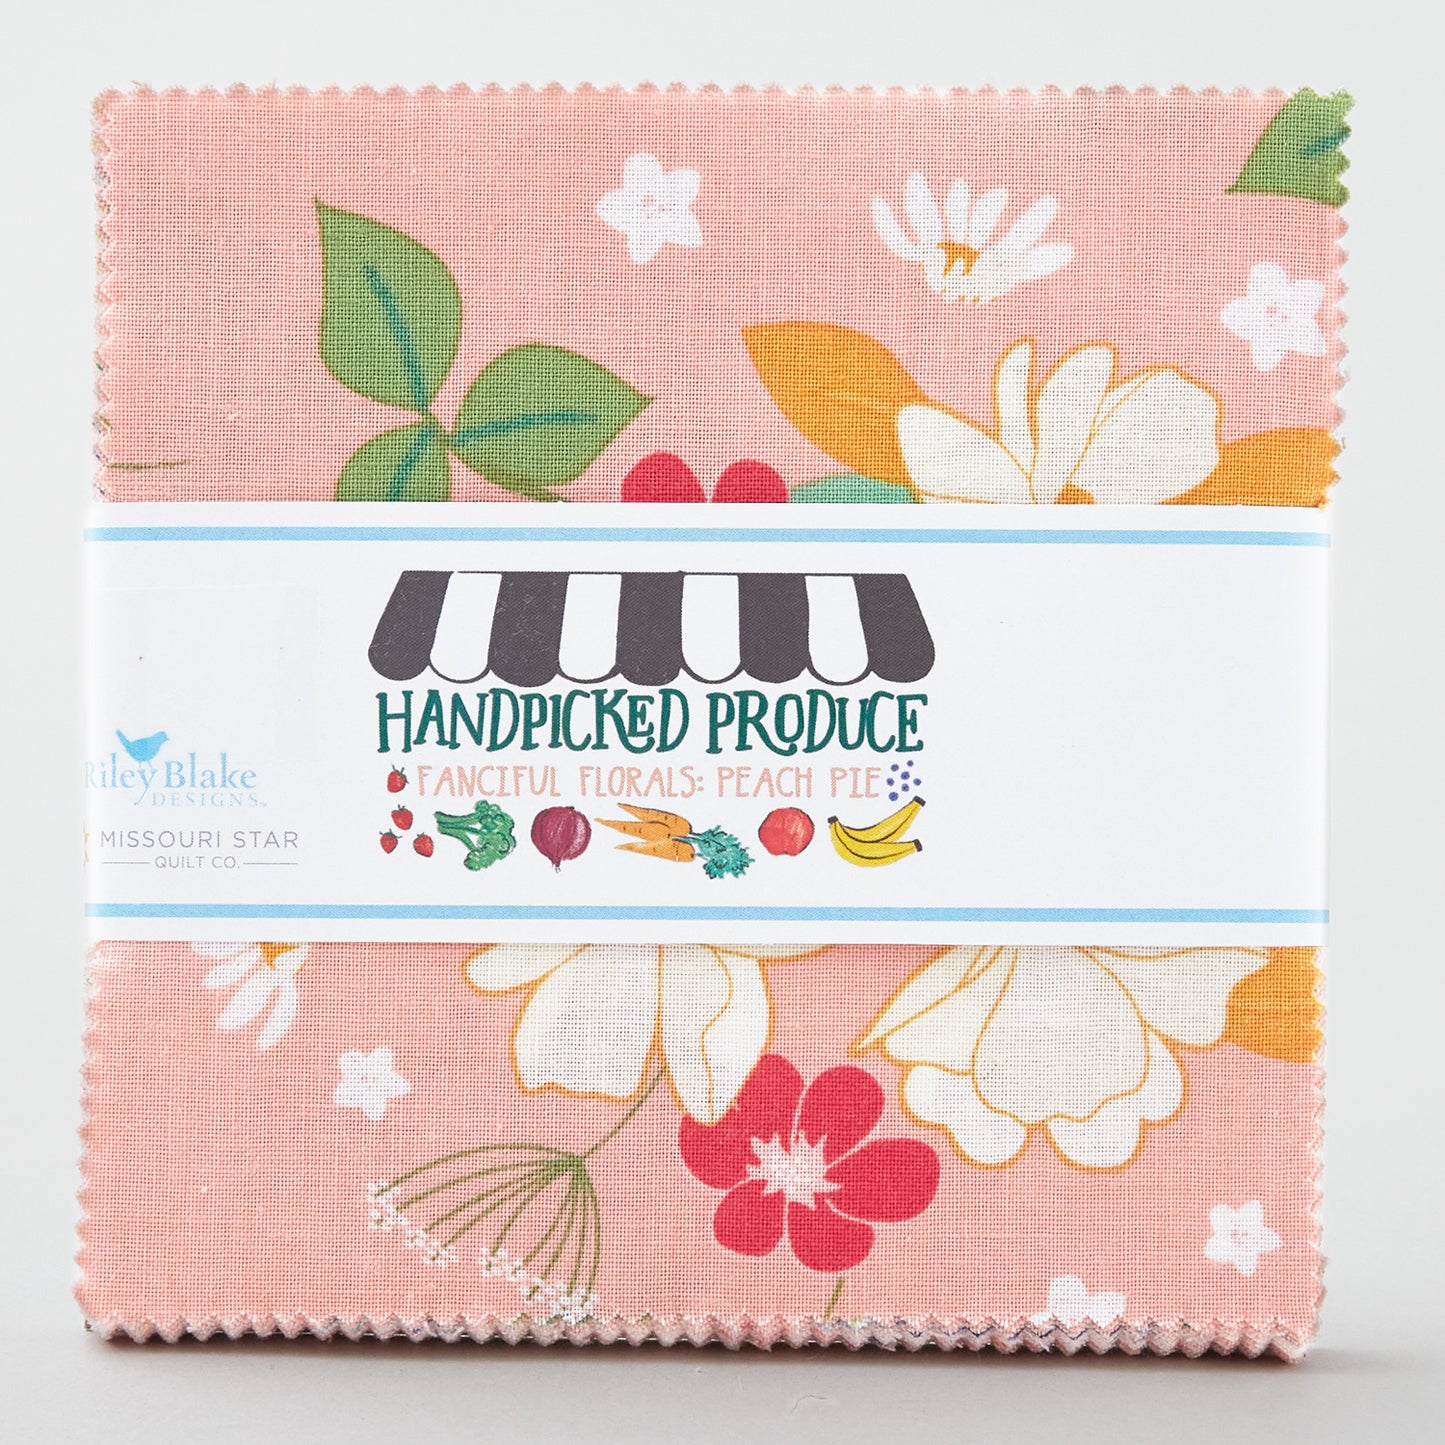 Handpicked Produce - Fanciful Florals Peach Pie 5" Stackers 24 pcs. Alternative View #1